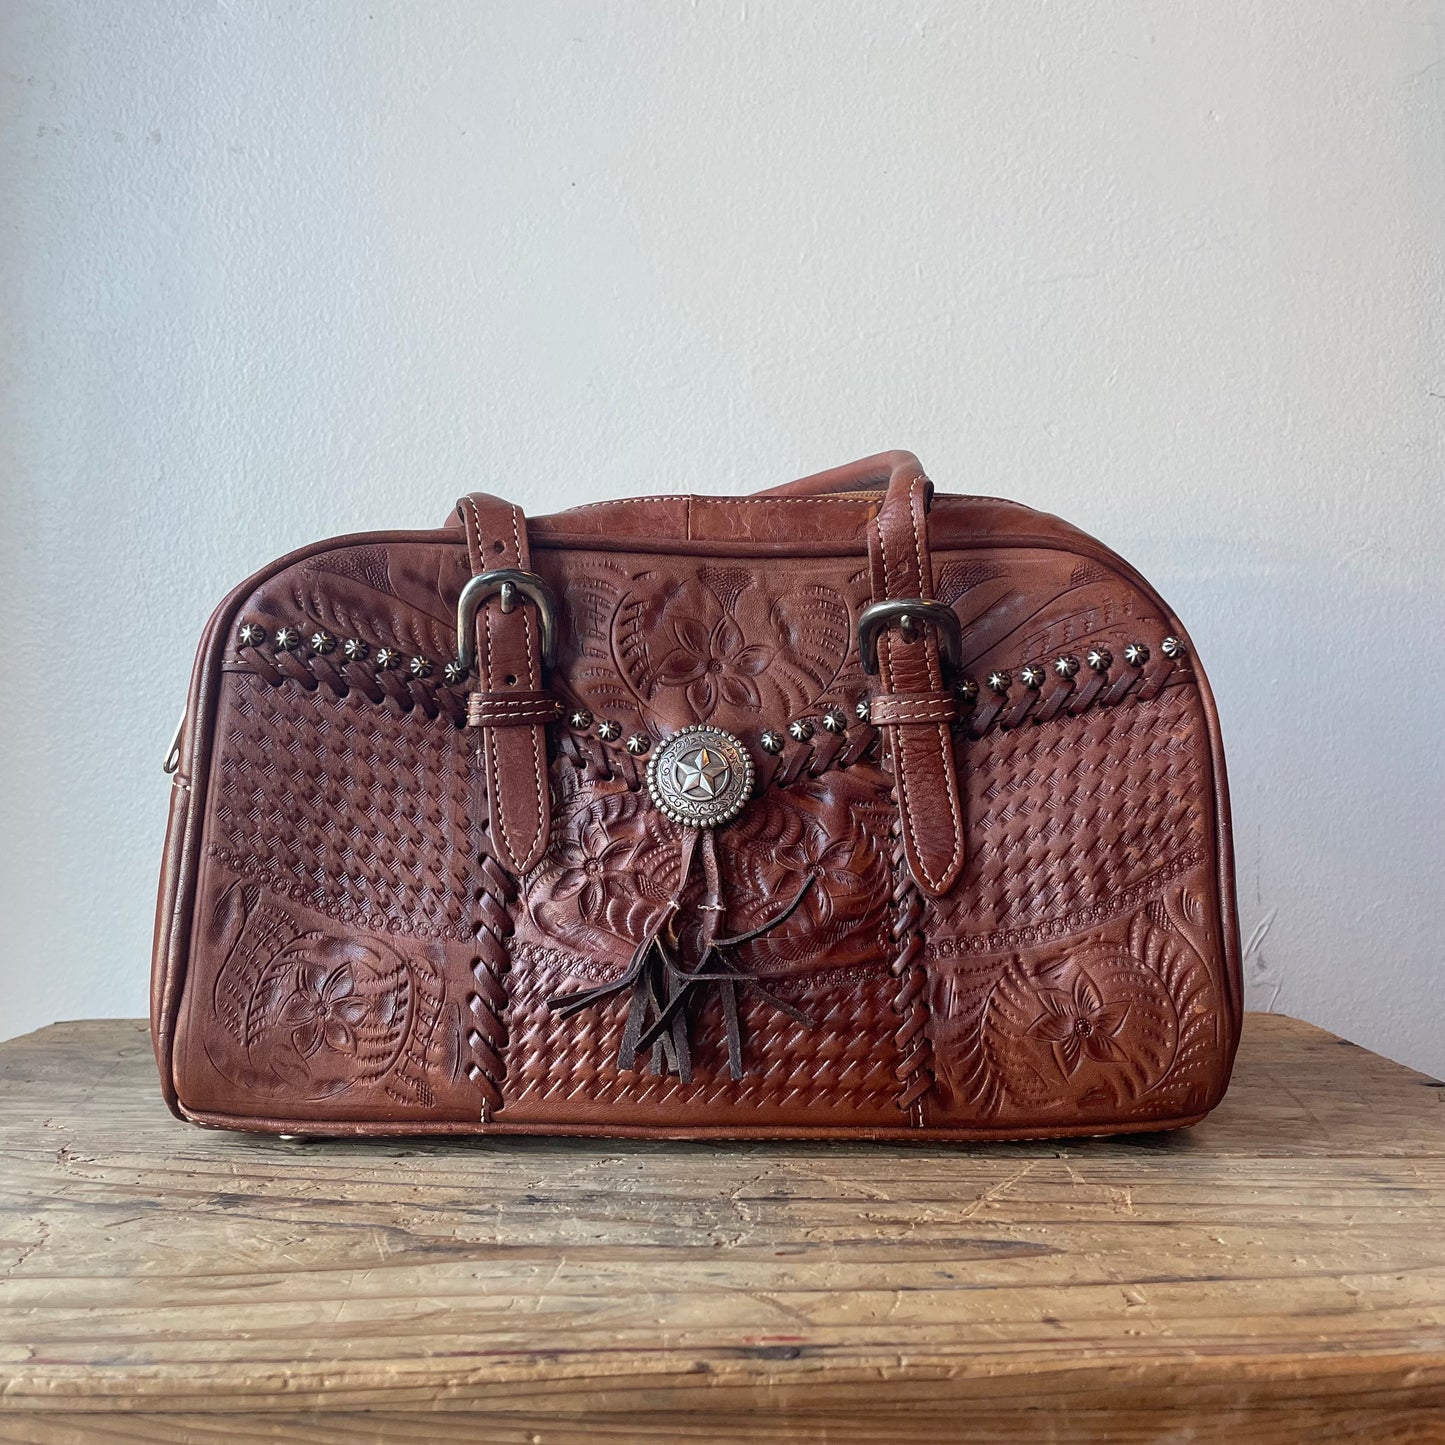 VTG Tooled Leather Handle Bag with Studs